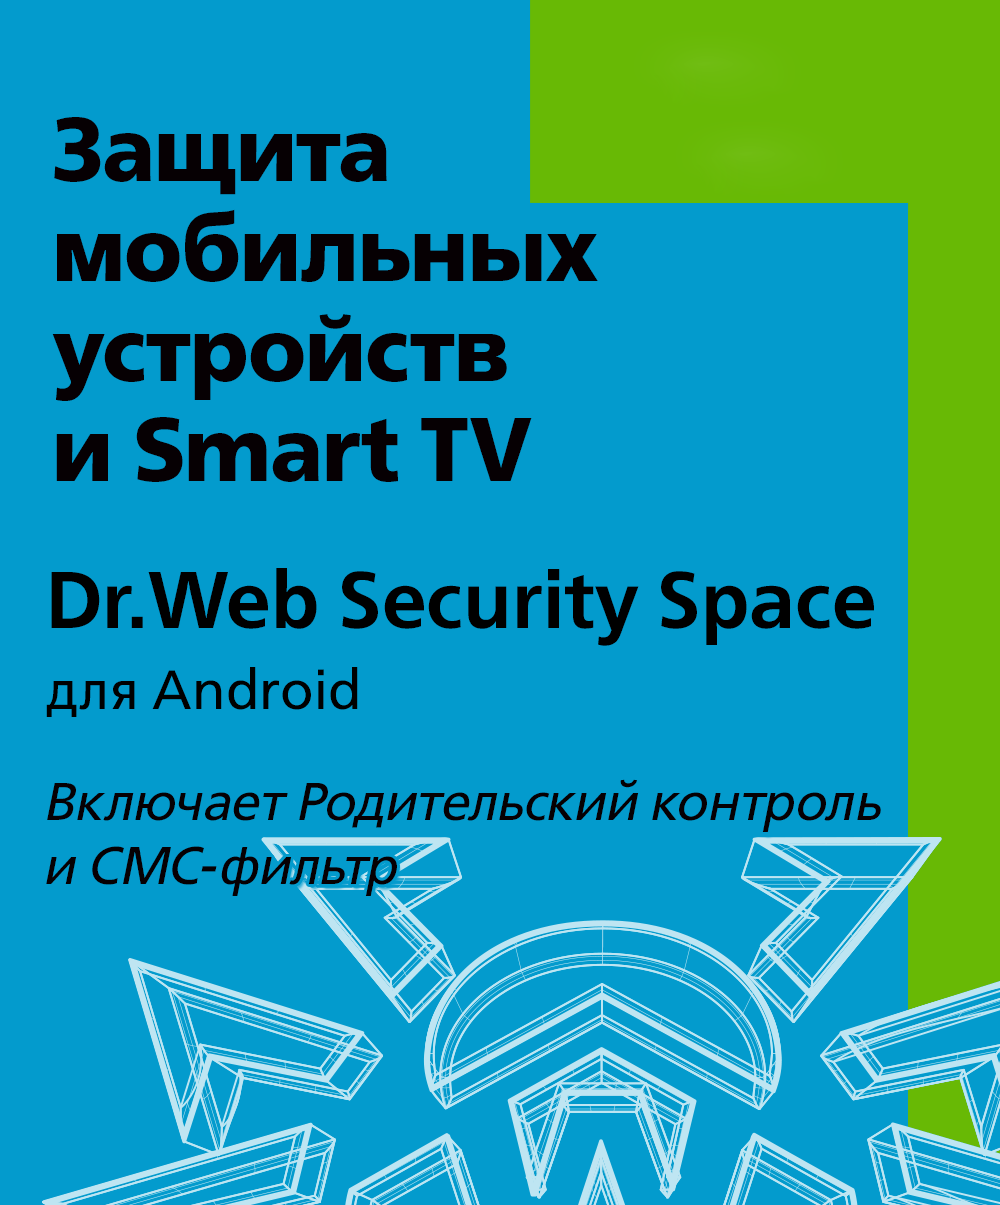 Dr.Web Security Space (for mobile devices) - for 5 devices, for 12 months, KZ